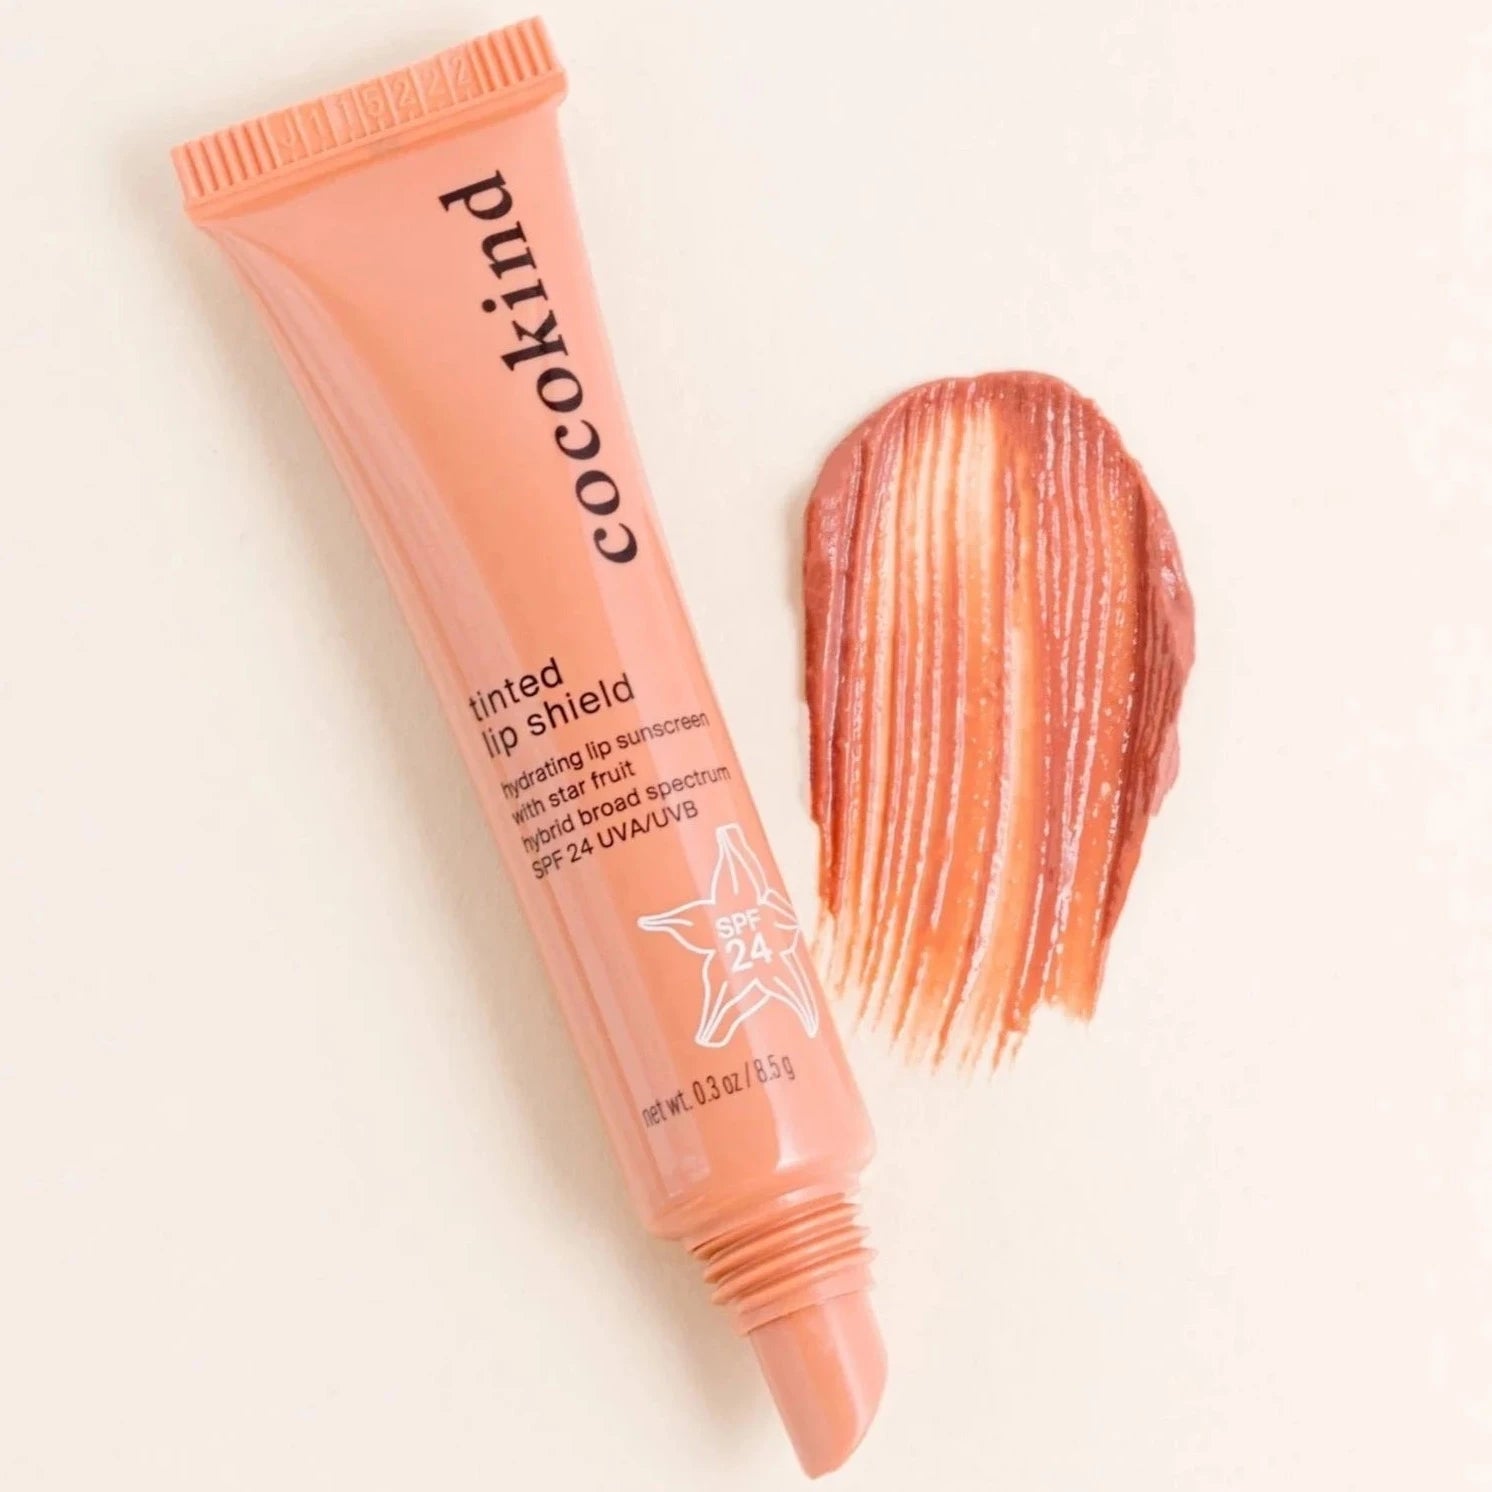 cocokind Tinted Lip Shield coral tube